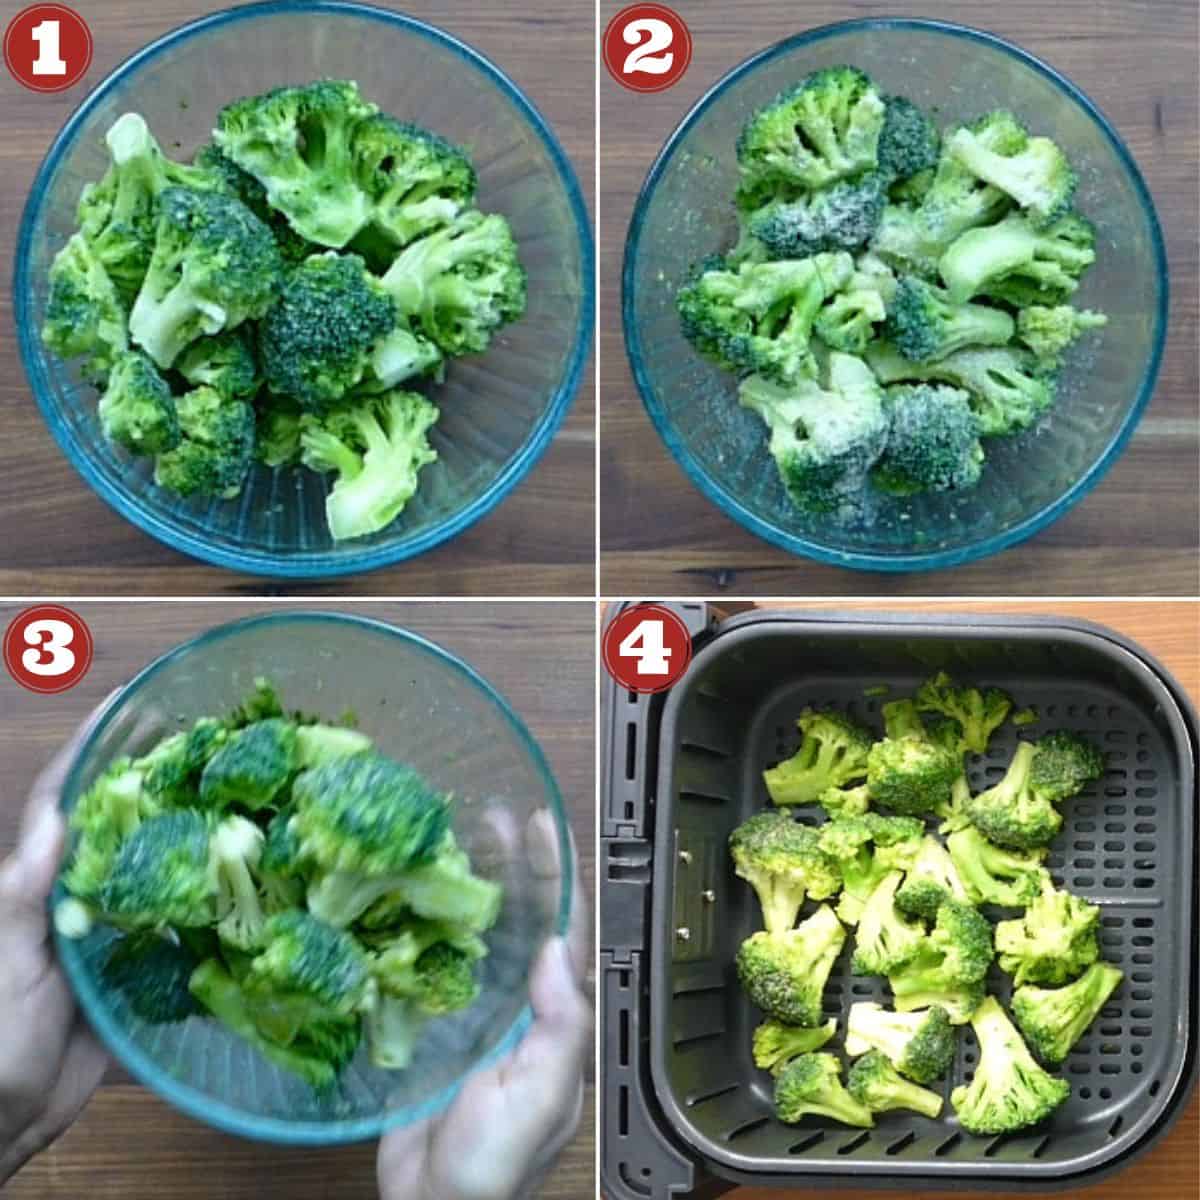 Collage with 4 cooking stages for frozen broccoli - in bowl, with spices, tossed, and in air fryer basket.